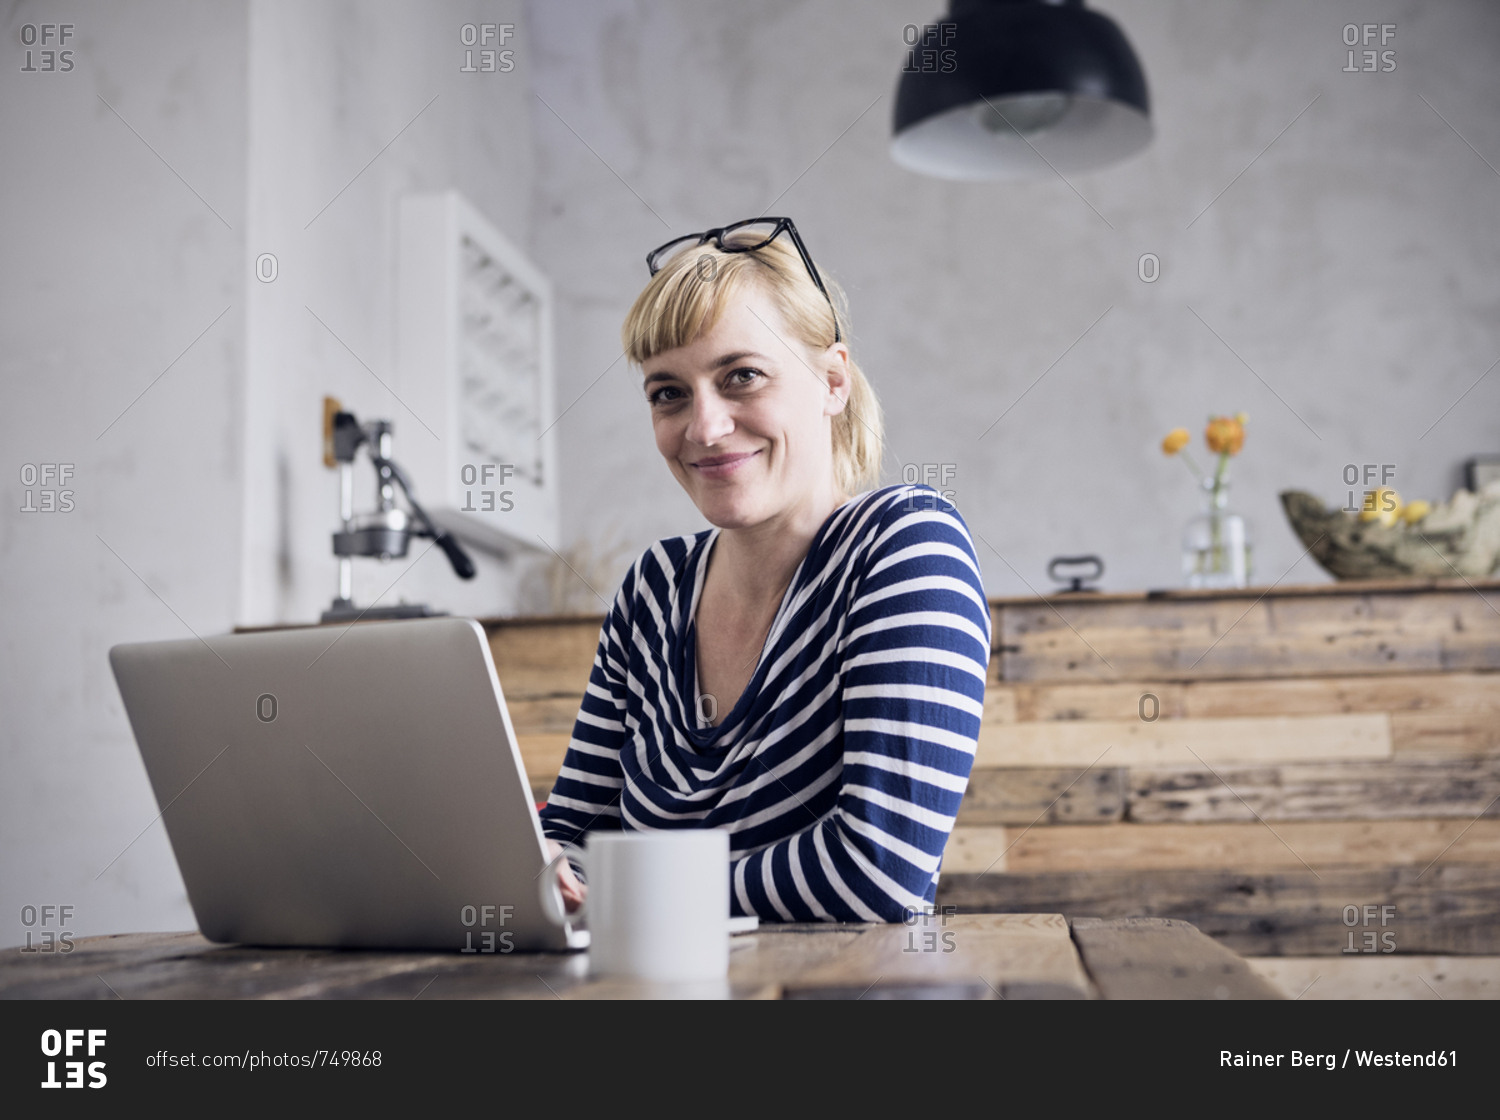 Portrait of smiling woman sitting at table with laptop and coffee mug